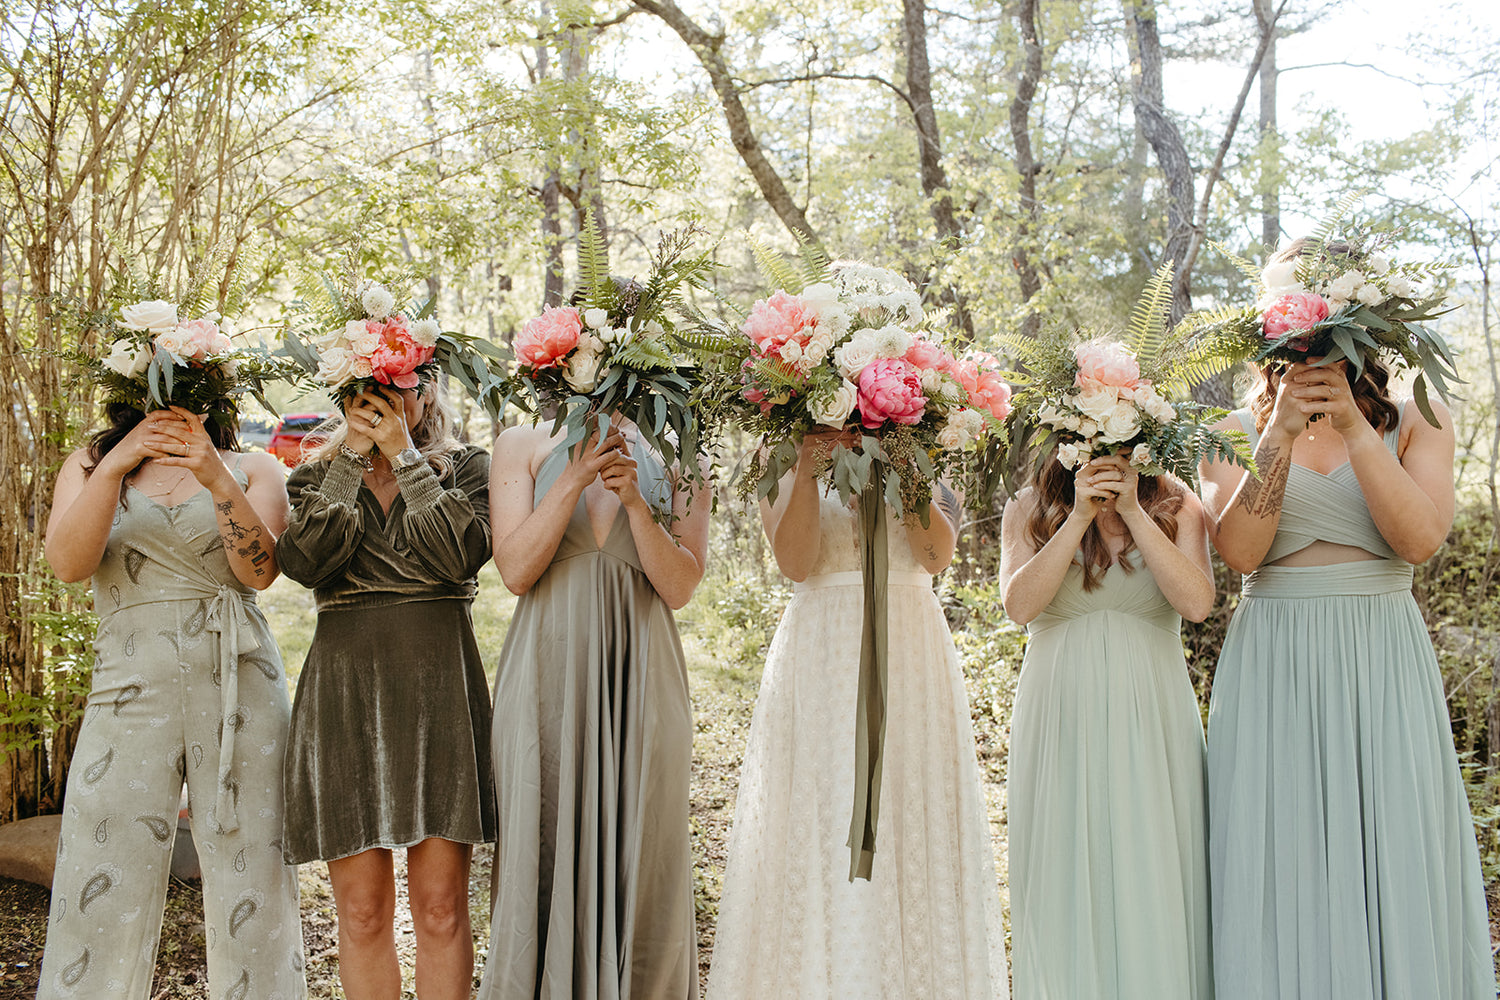 Northwest Arkansas wedding flowers for bride and bridesmaids Earth & Thorn Florist and Laura Powers Photography